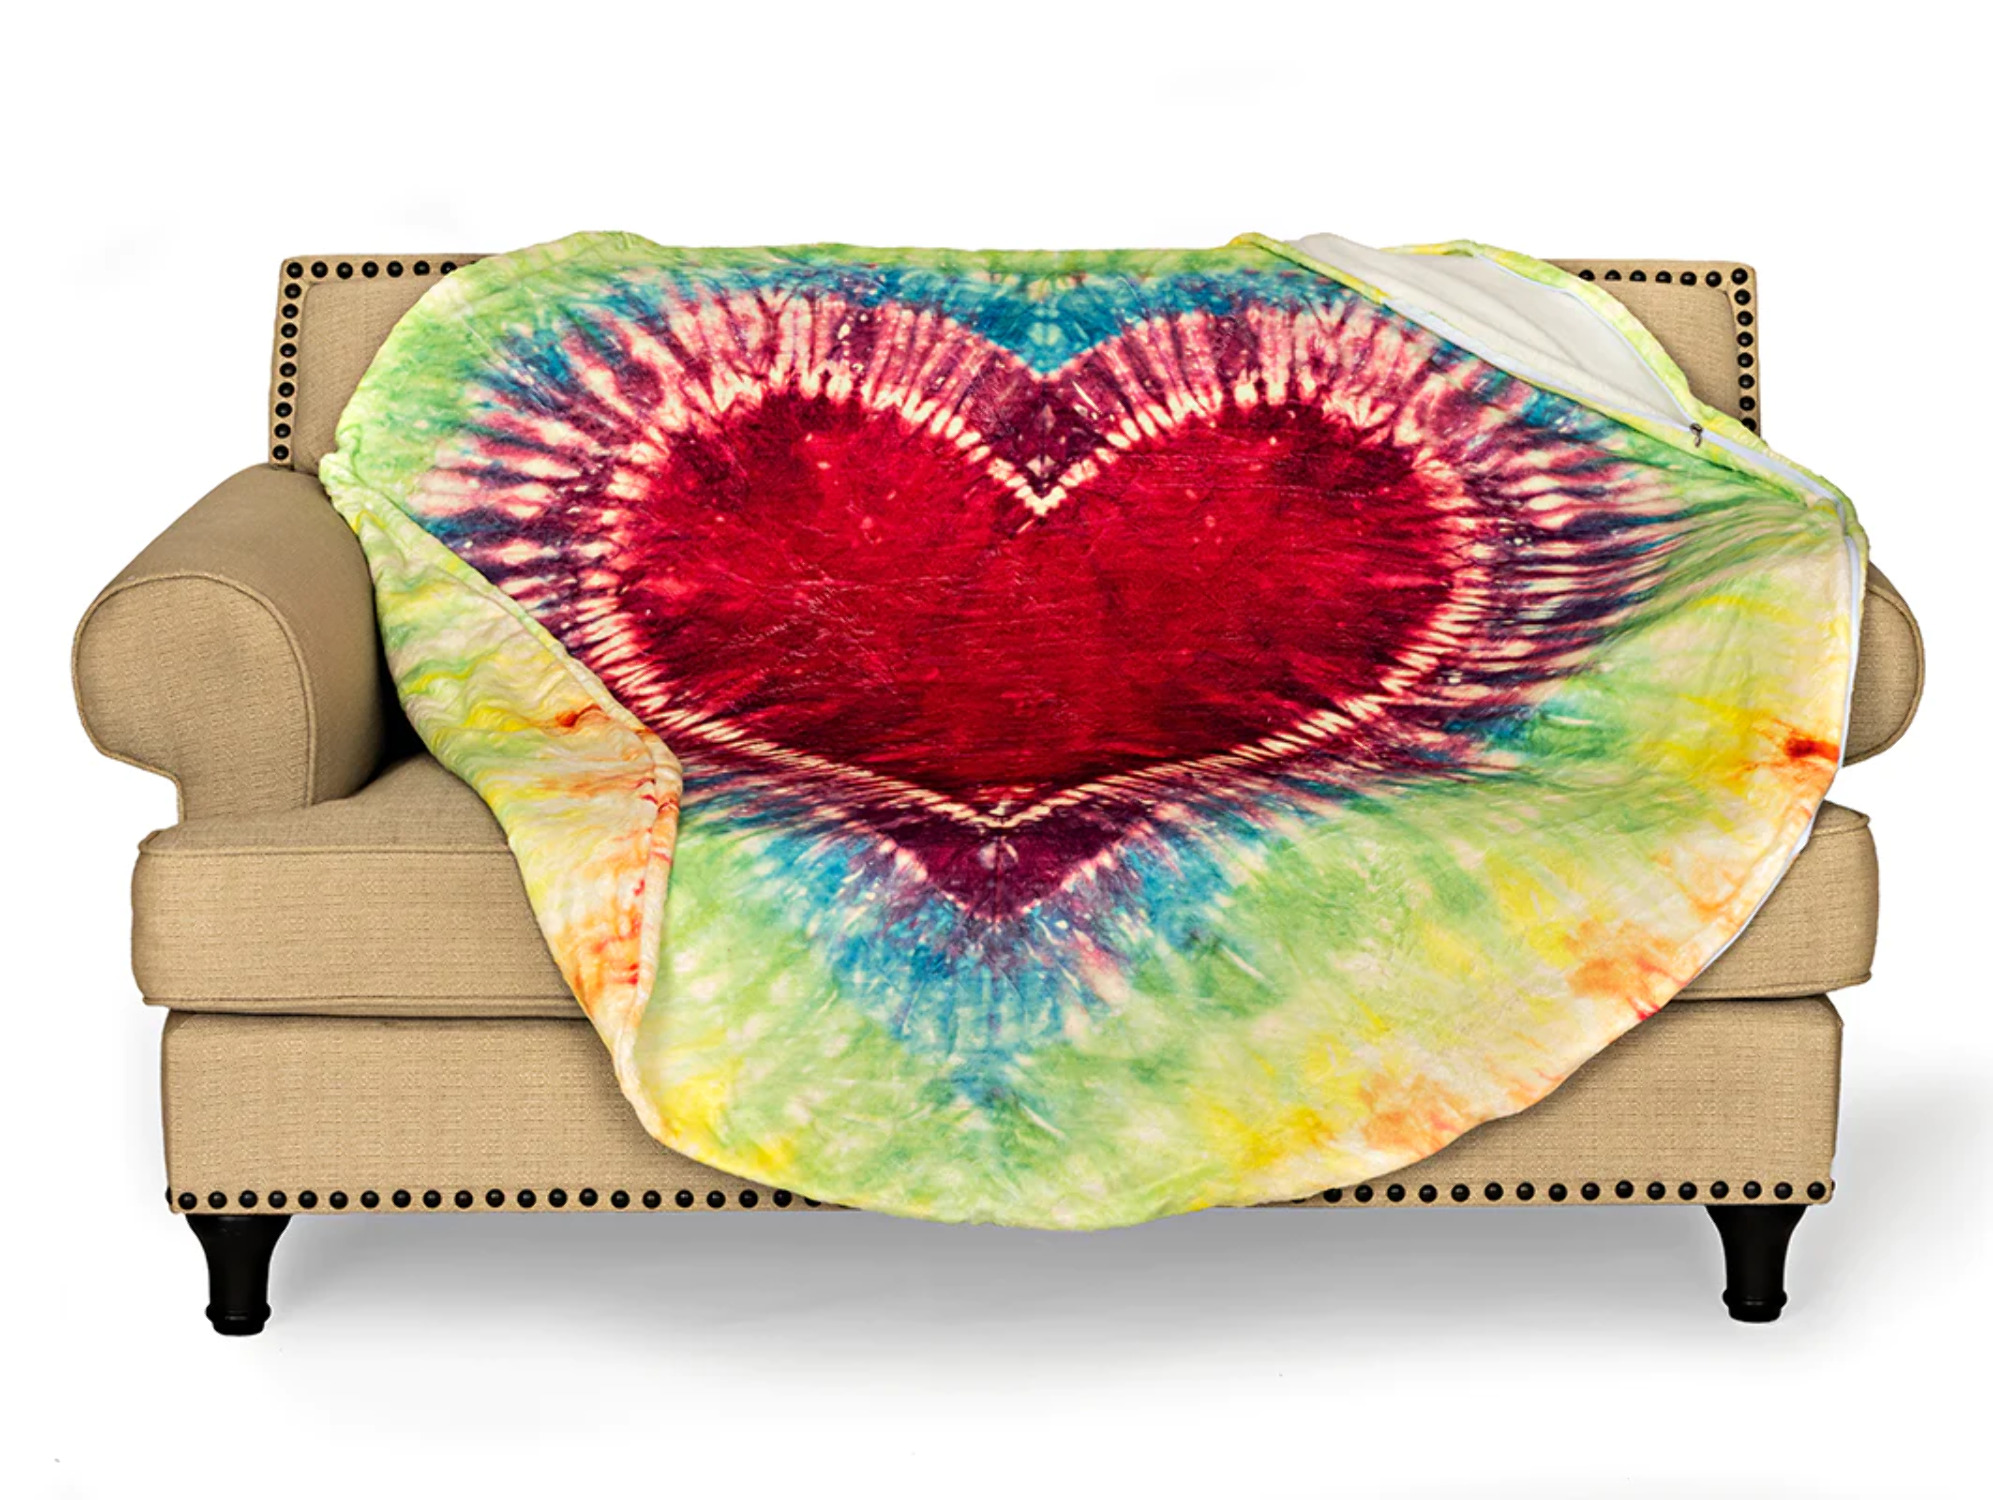 Heart Tie Dye Round Sleeping Bag Blanket 60" Diameter - Cozy Warm Flannel - Novelty Circle Throw Blanket Unique & Fun Love Blanket - Perfect for Kids, Perfect for Birthday Gift - image 5 of 5